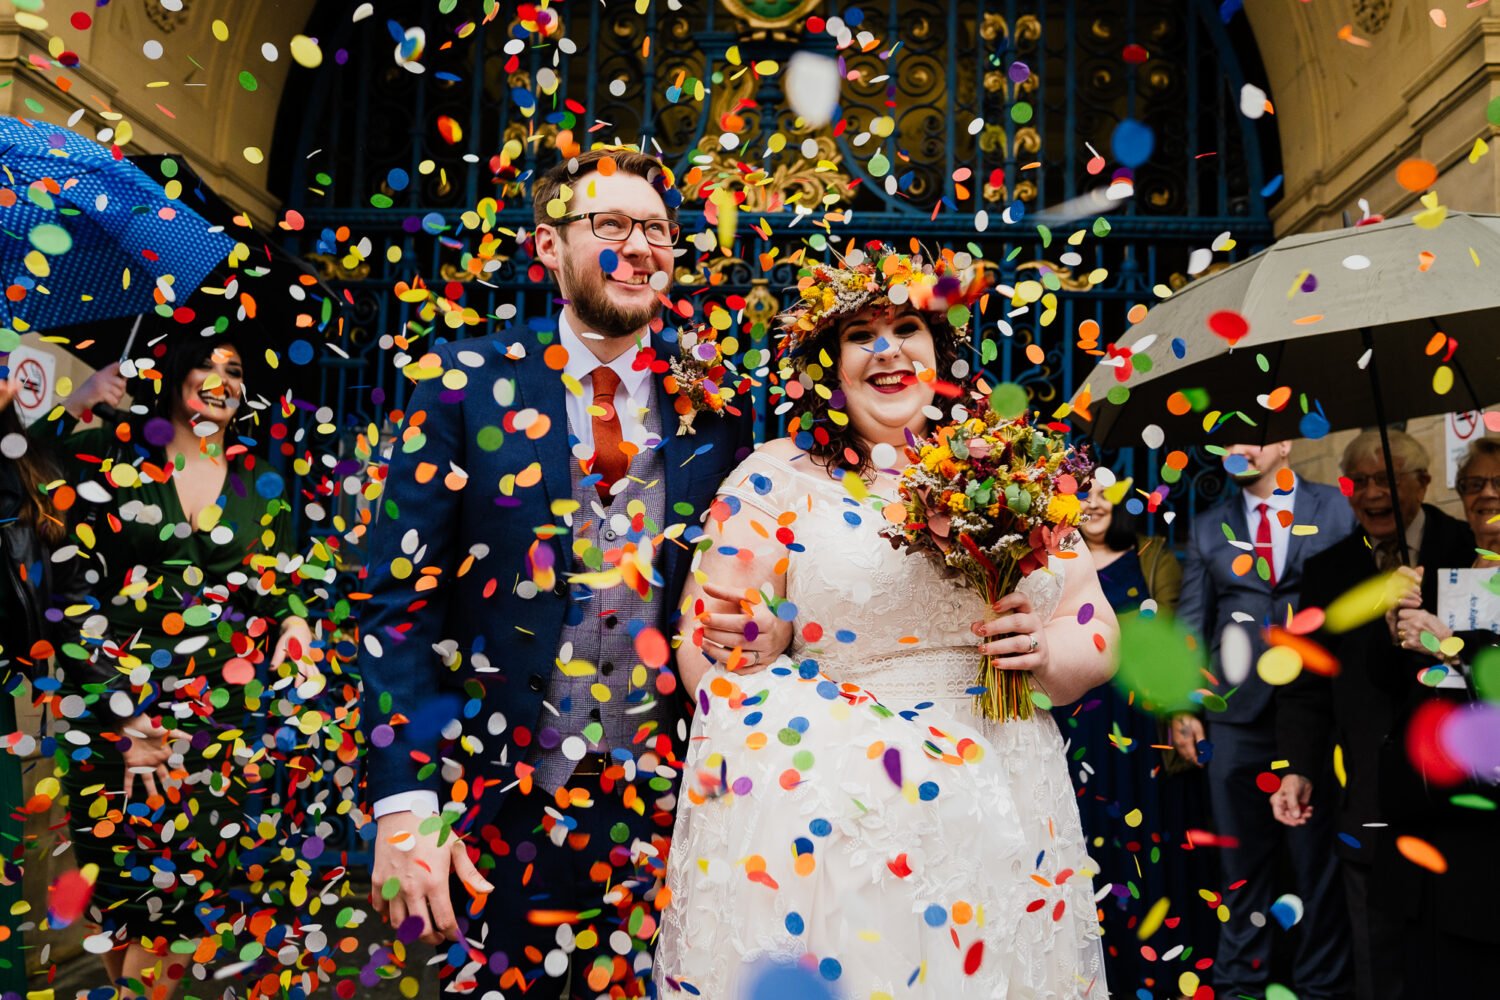 Bride and groom confetti throw with colourful paper